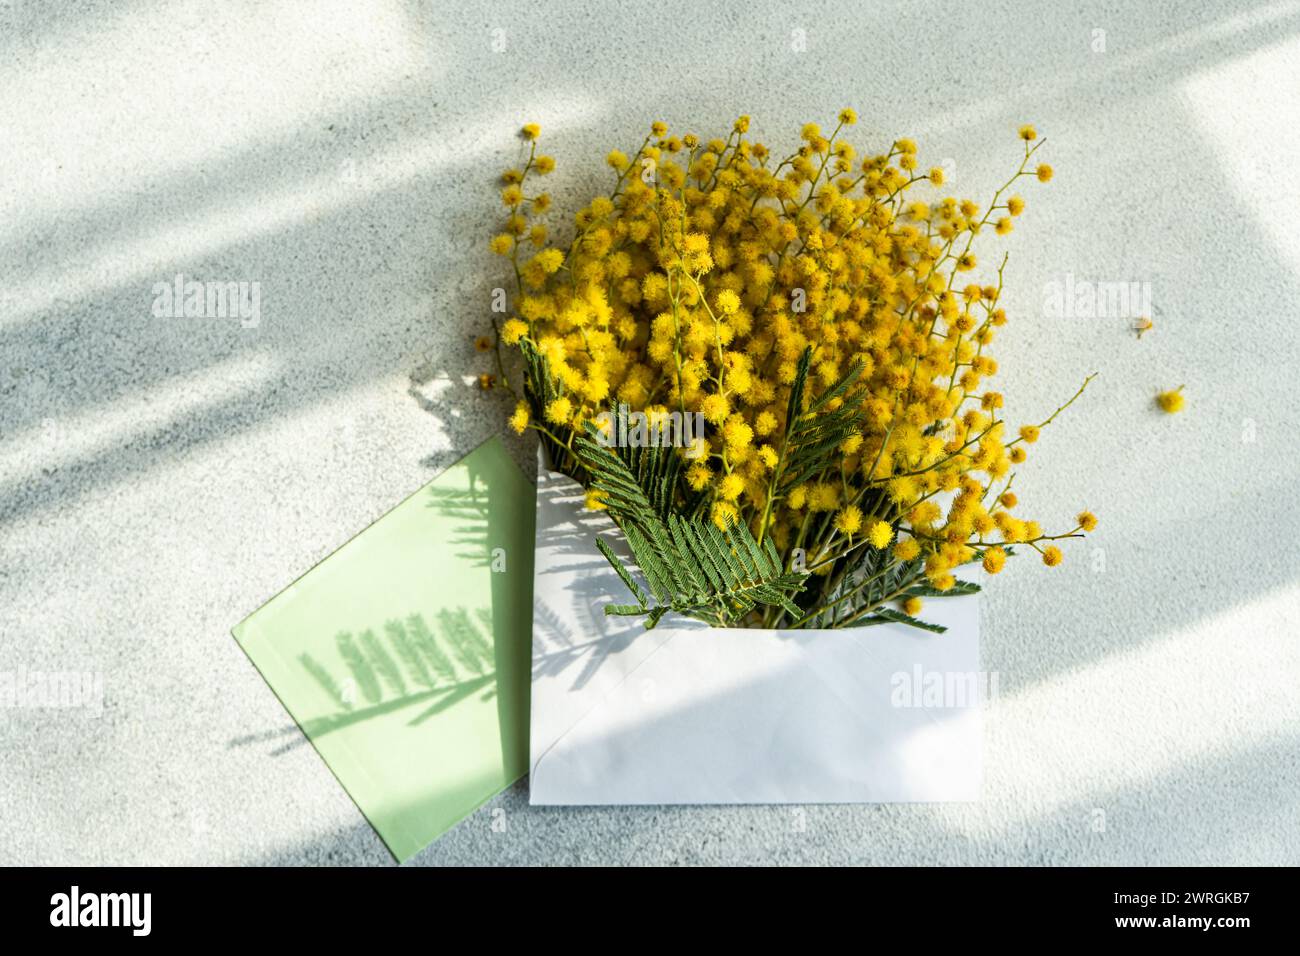 Overhead view of a bunch of yellow mimosa flowers in an envelope on a table Stock Photo